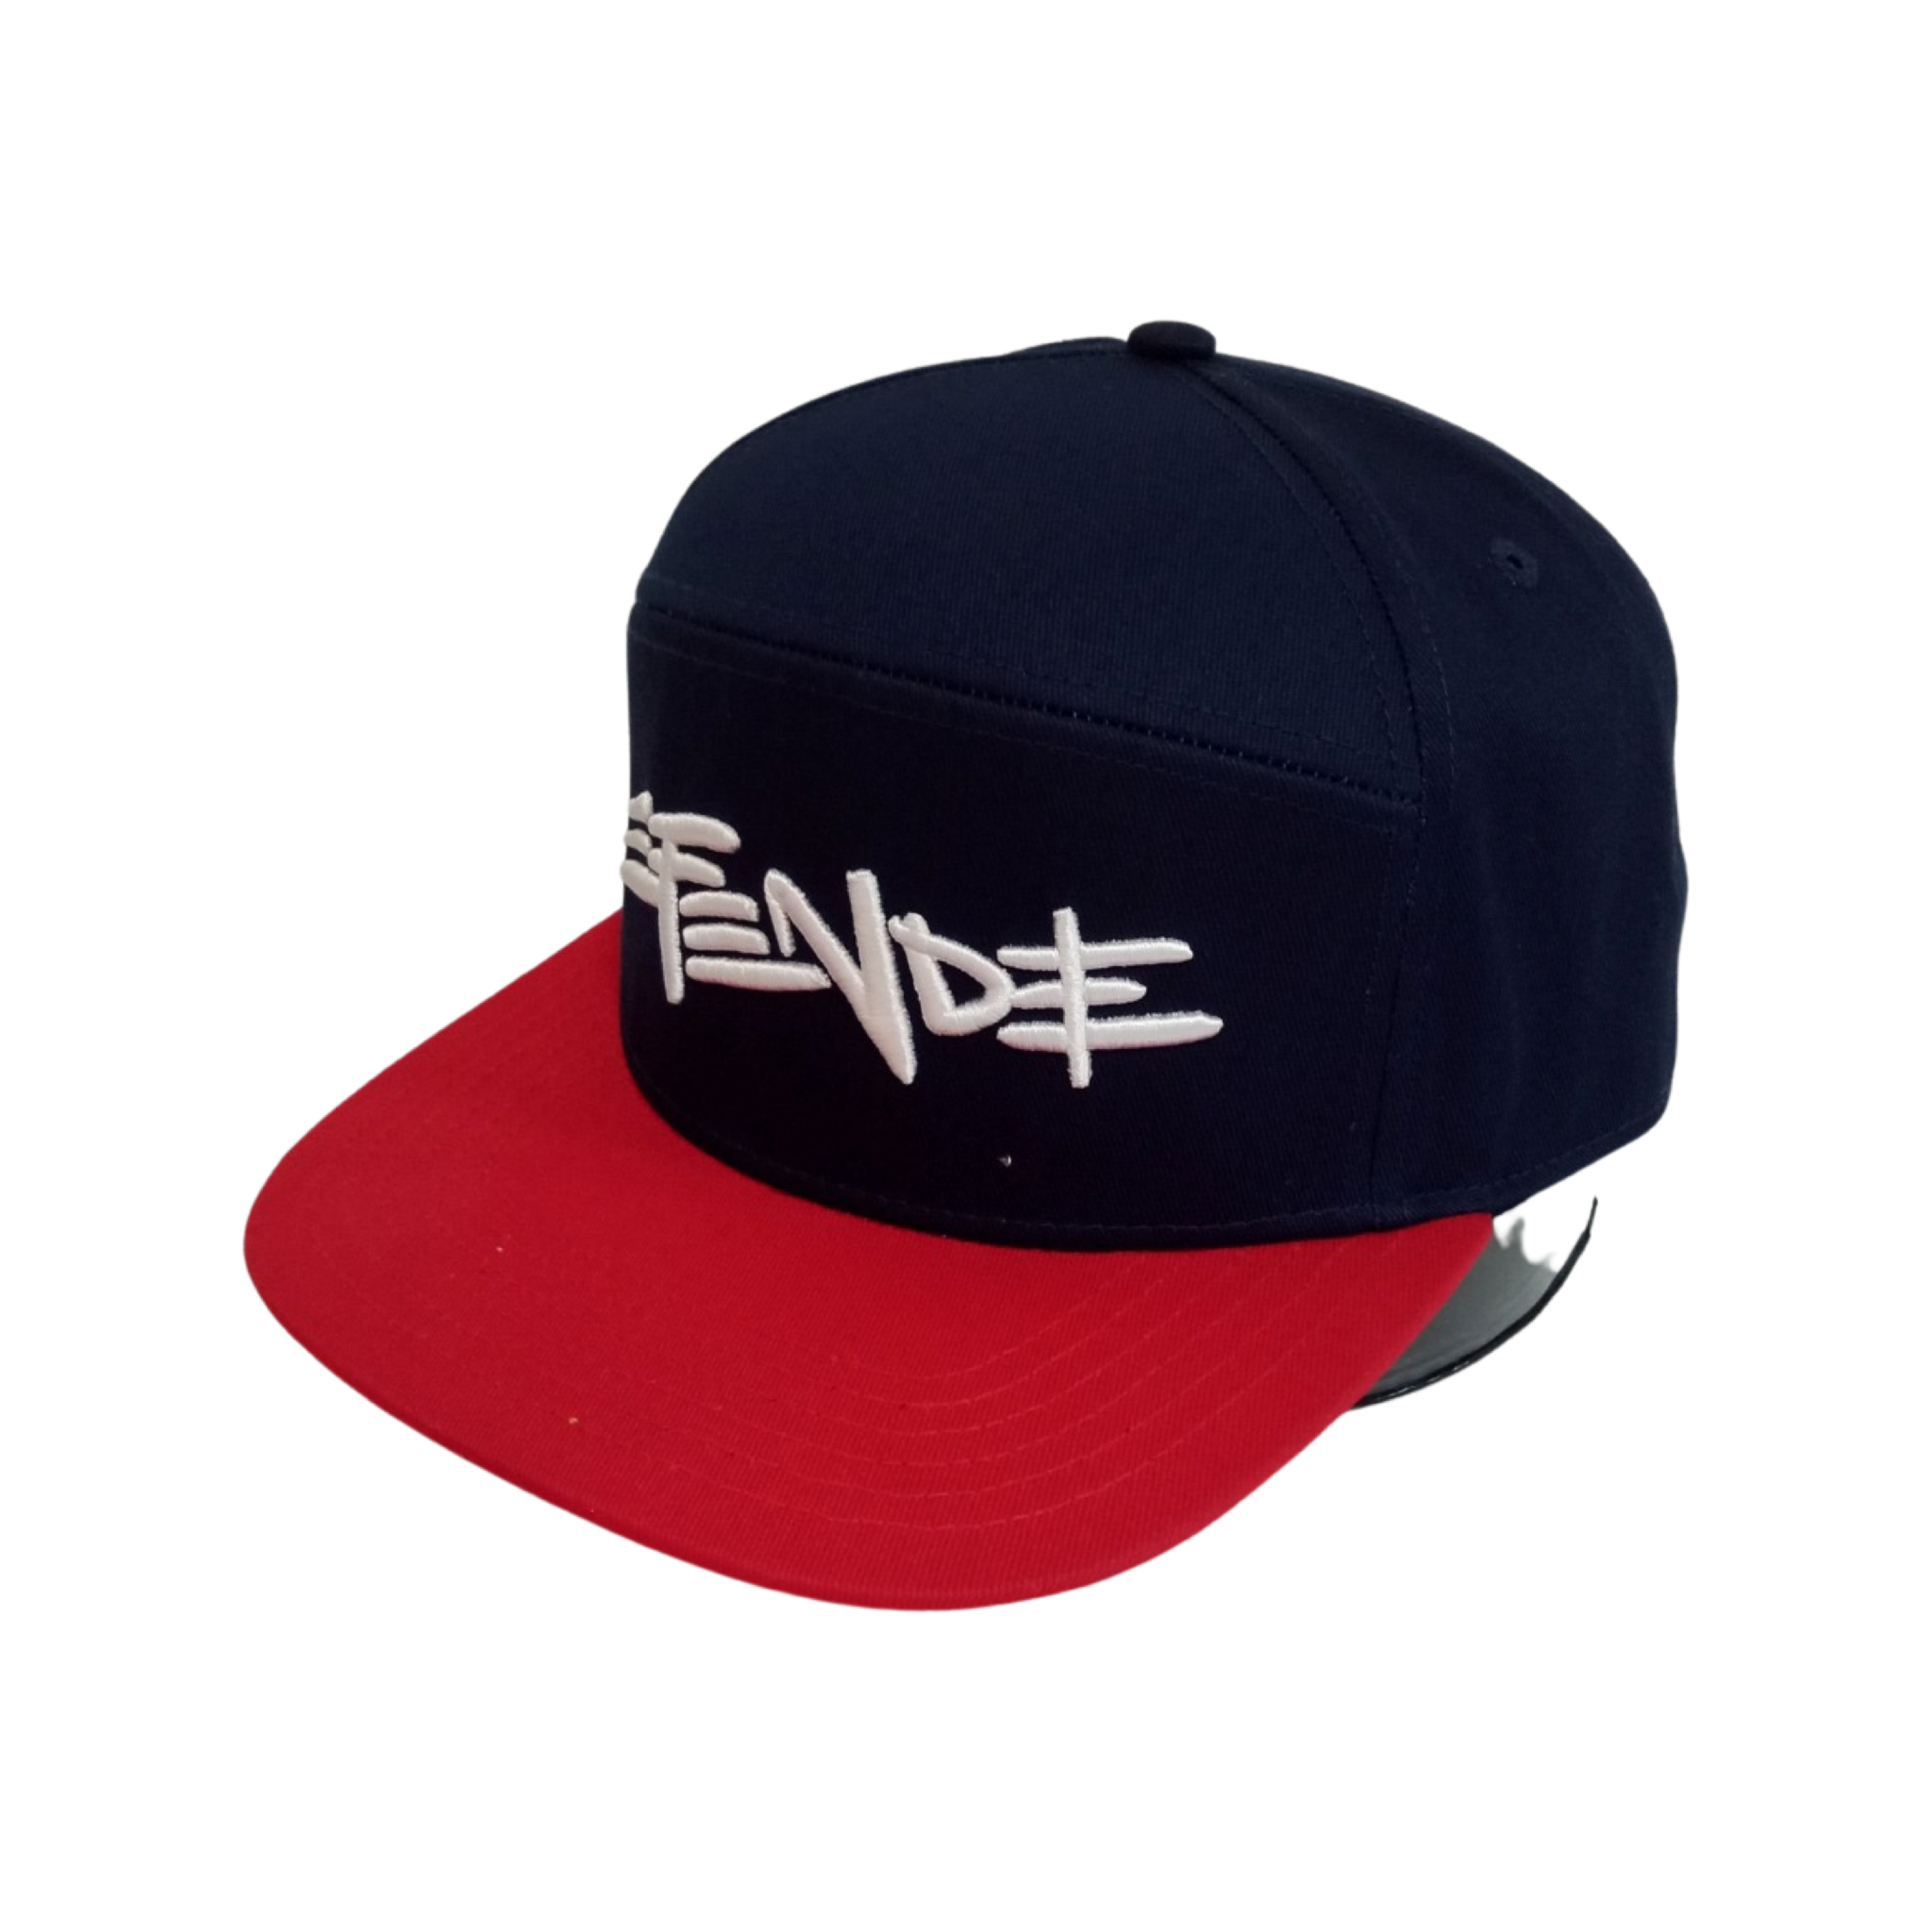 EFENDEE 7 Panel Hat - Red and Navy Blue